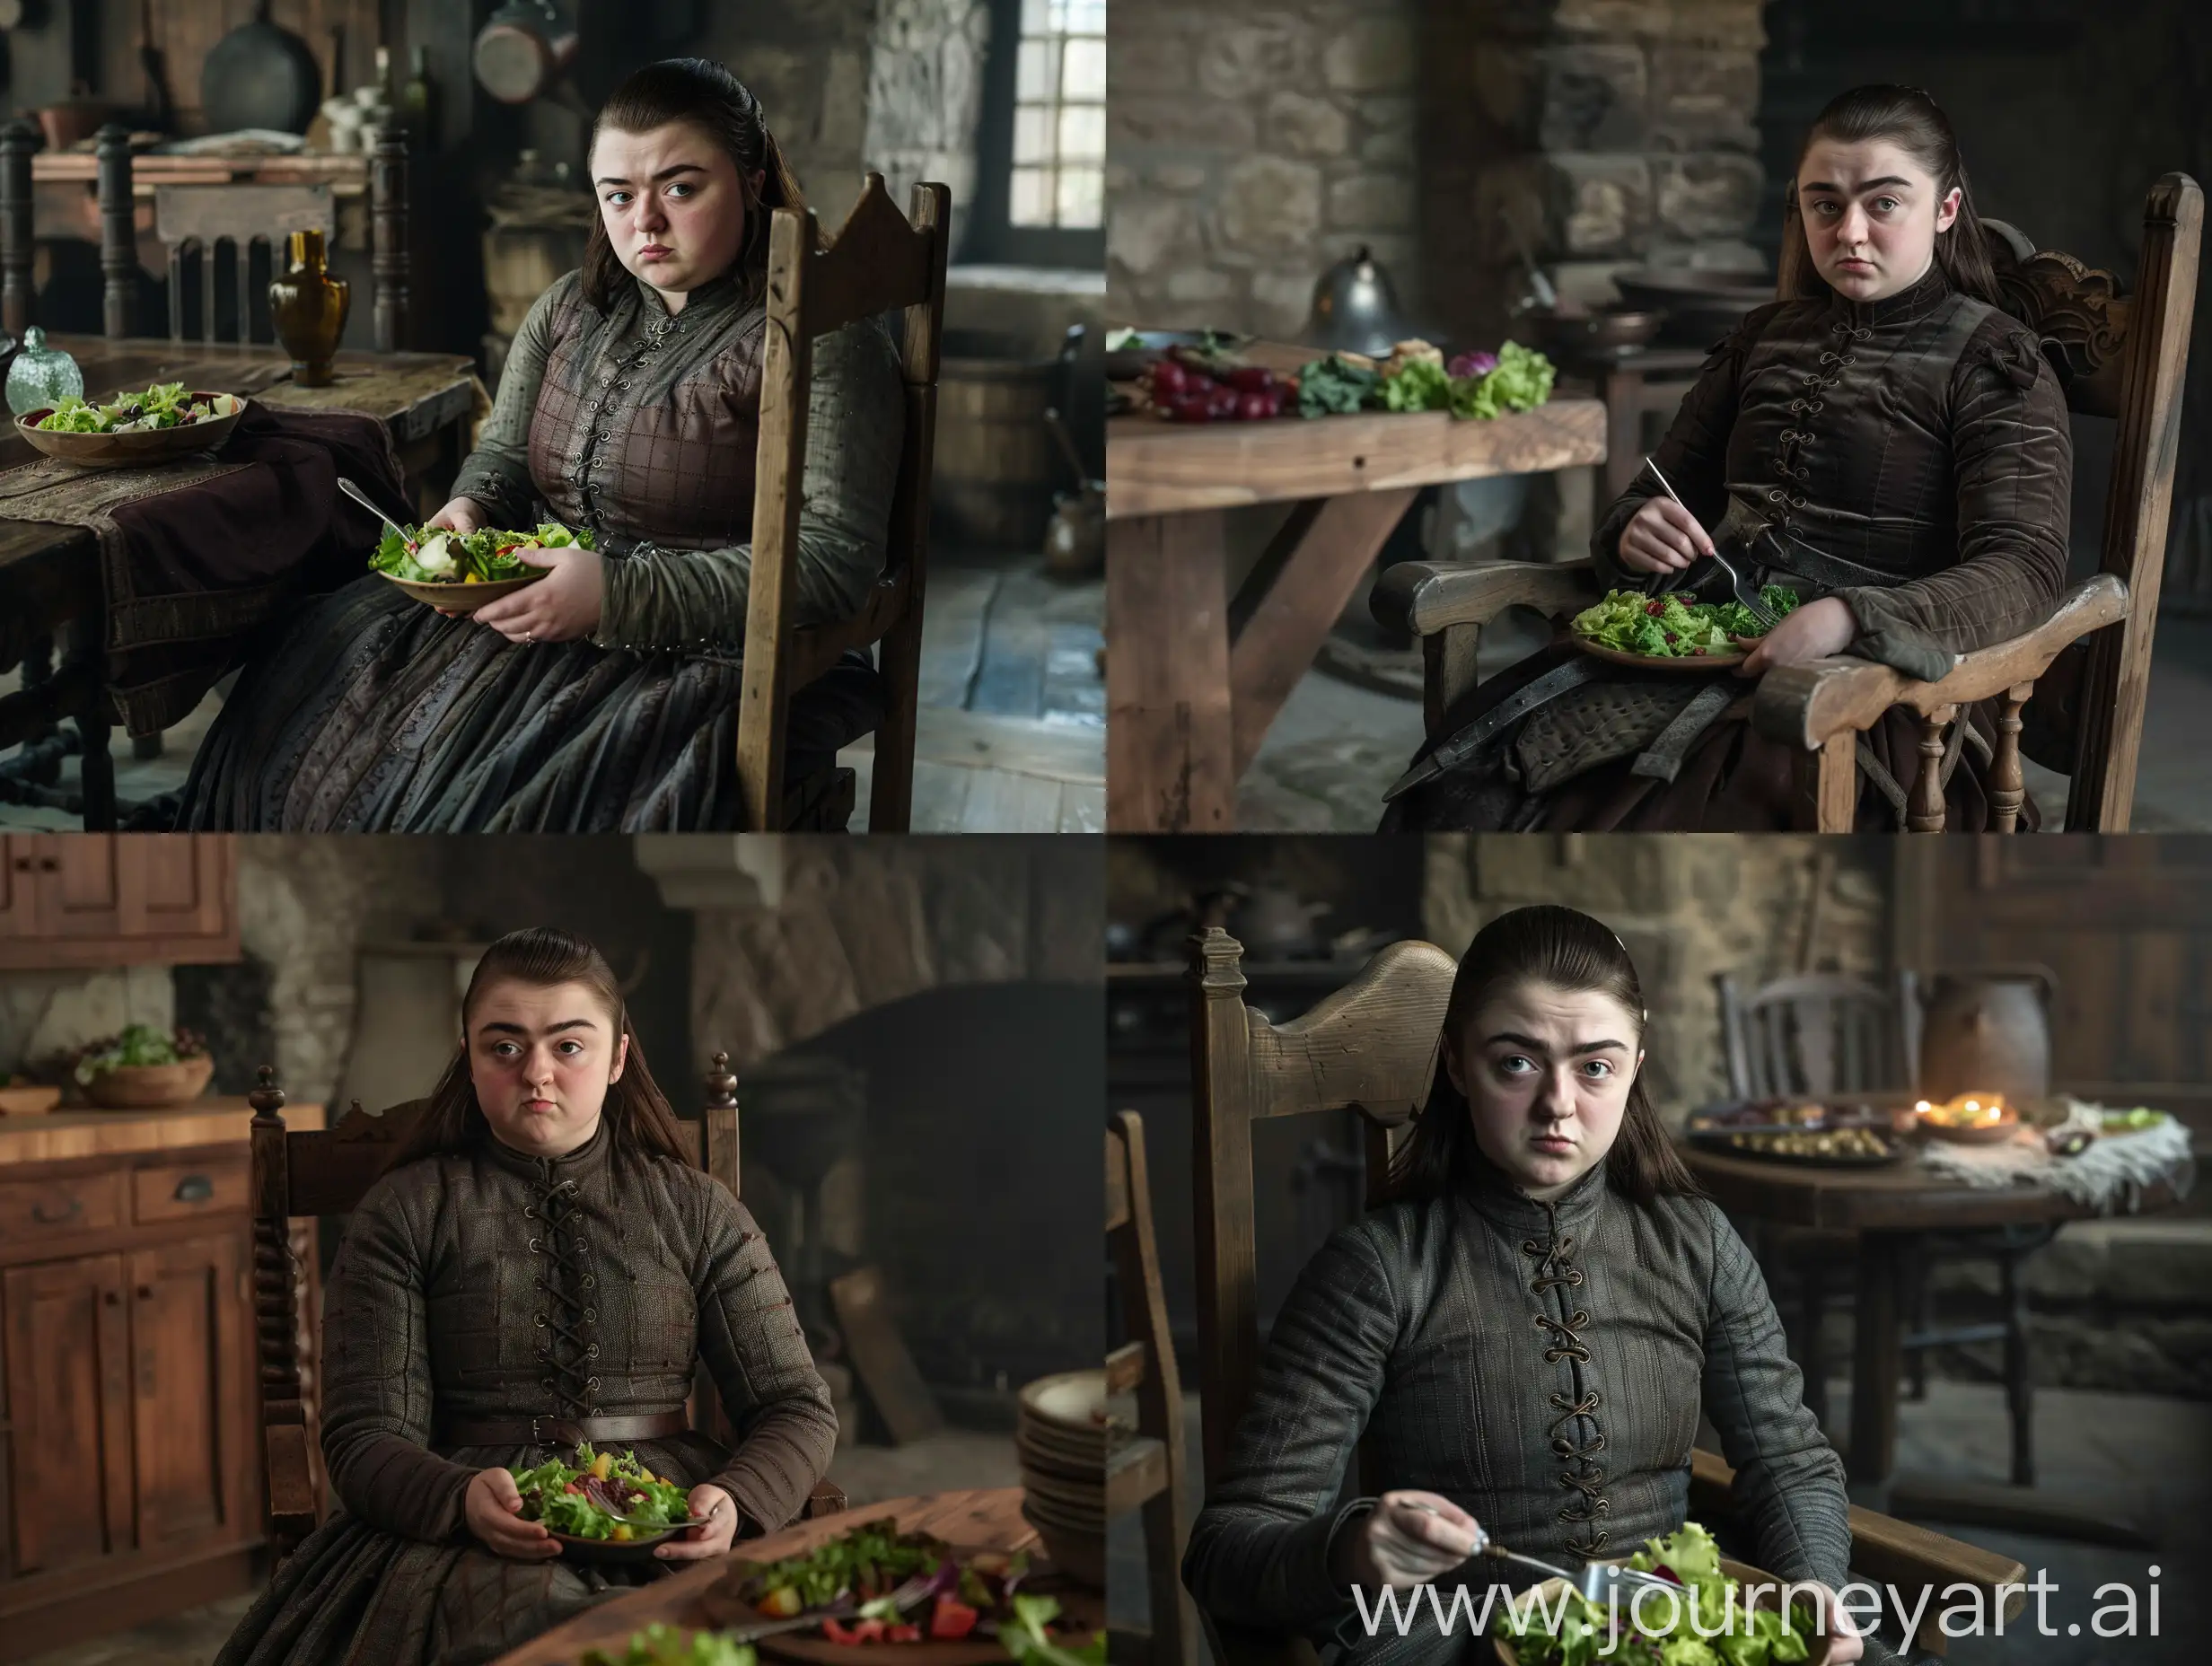 Arya Stark is in Game of Thrones, Arya Stark is rounder, Arya Stark is very, very fat, Arya Stark is sitting on a wooden chair in the kitchen of Winterfell Castle, Arya Stark is eating salad with a fork, Arya Stark is looking at the camera It doesn't, the camera showing a fat Arya Stark from a distance in a three-quarter profile, the style of The Witcher, the lighting is classic, realistic, q2